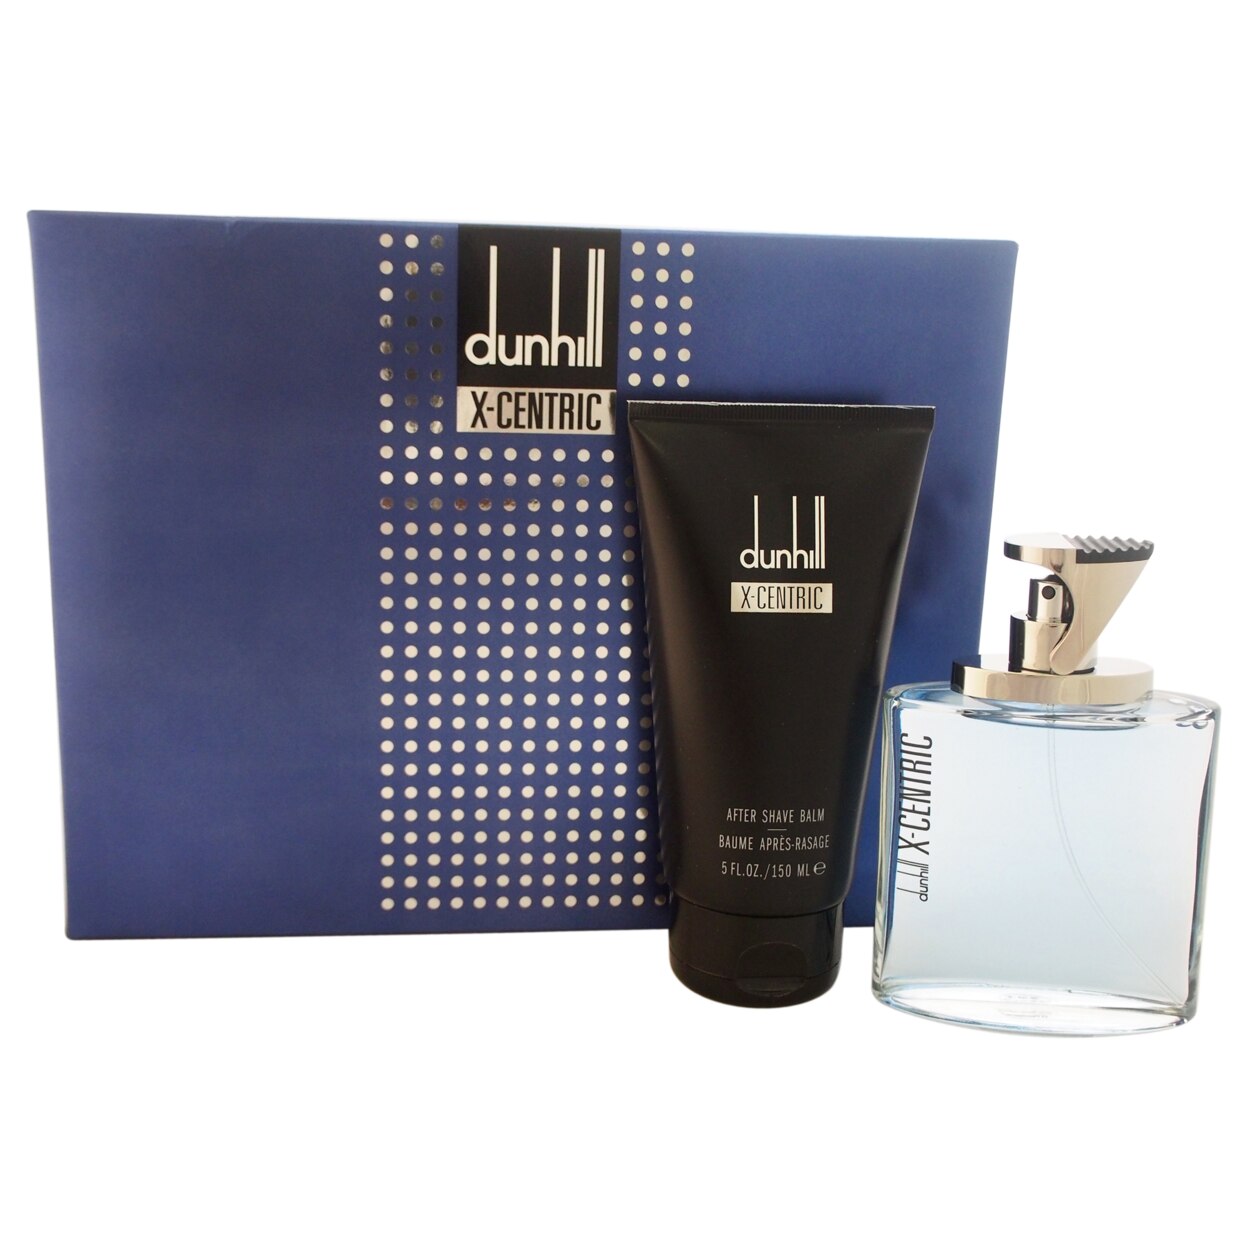 Dunhill X-centric 2 Piece Perfume Gift Set for Men at Ratans Online Shop - Perfumes Wholesale and Retailer Fragrance